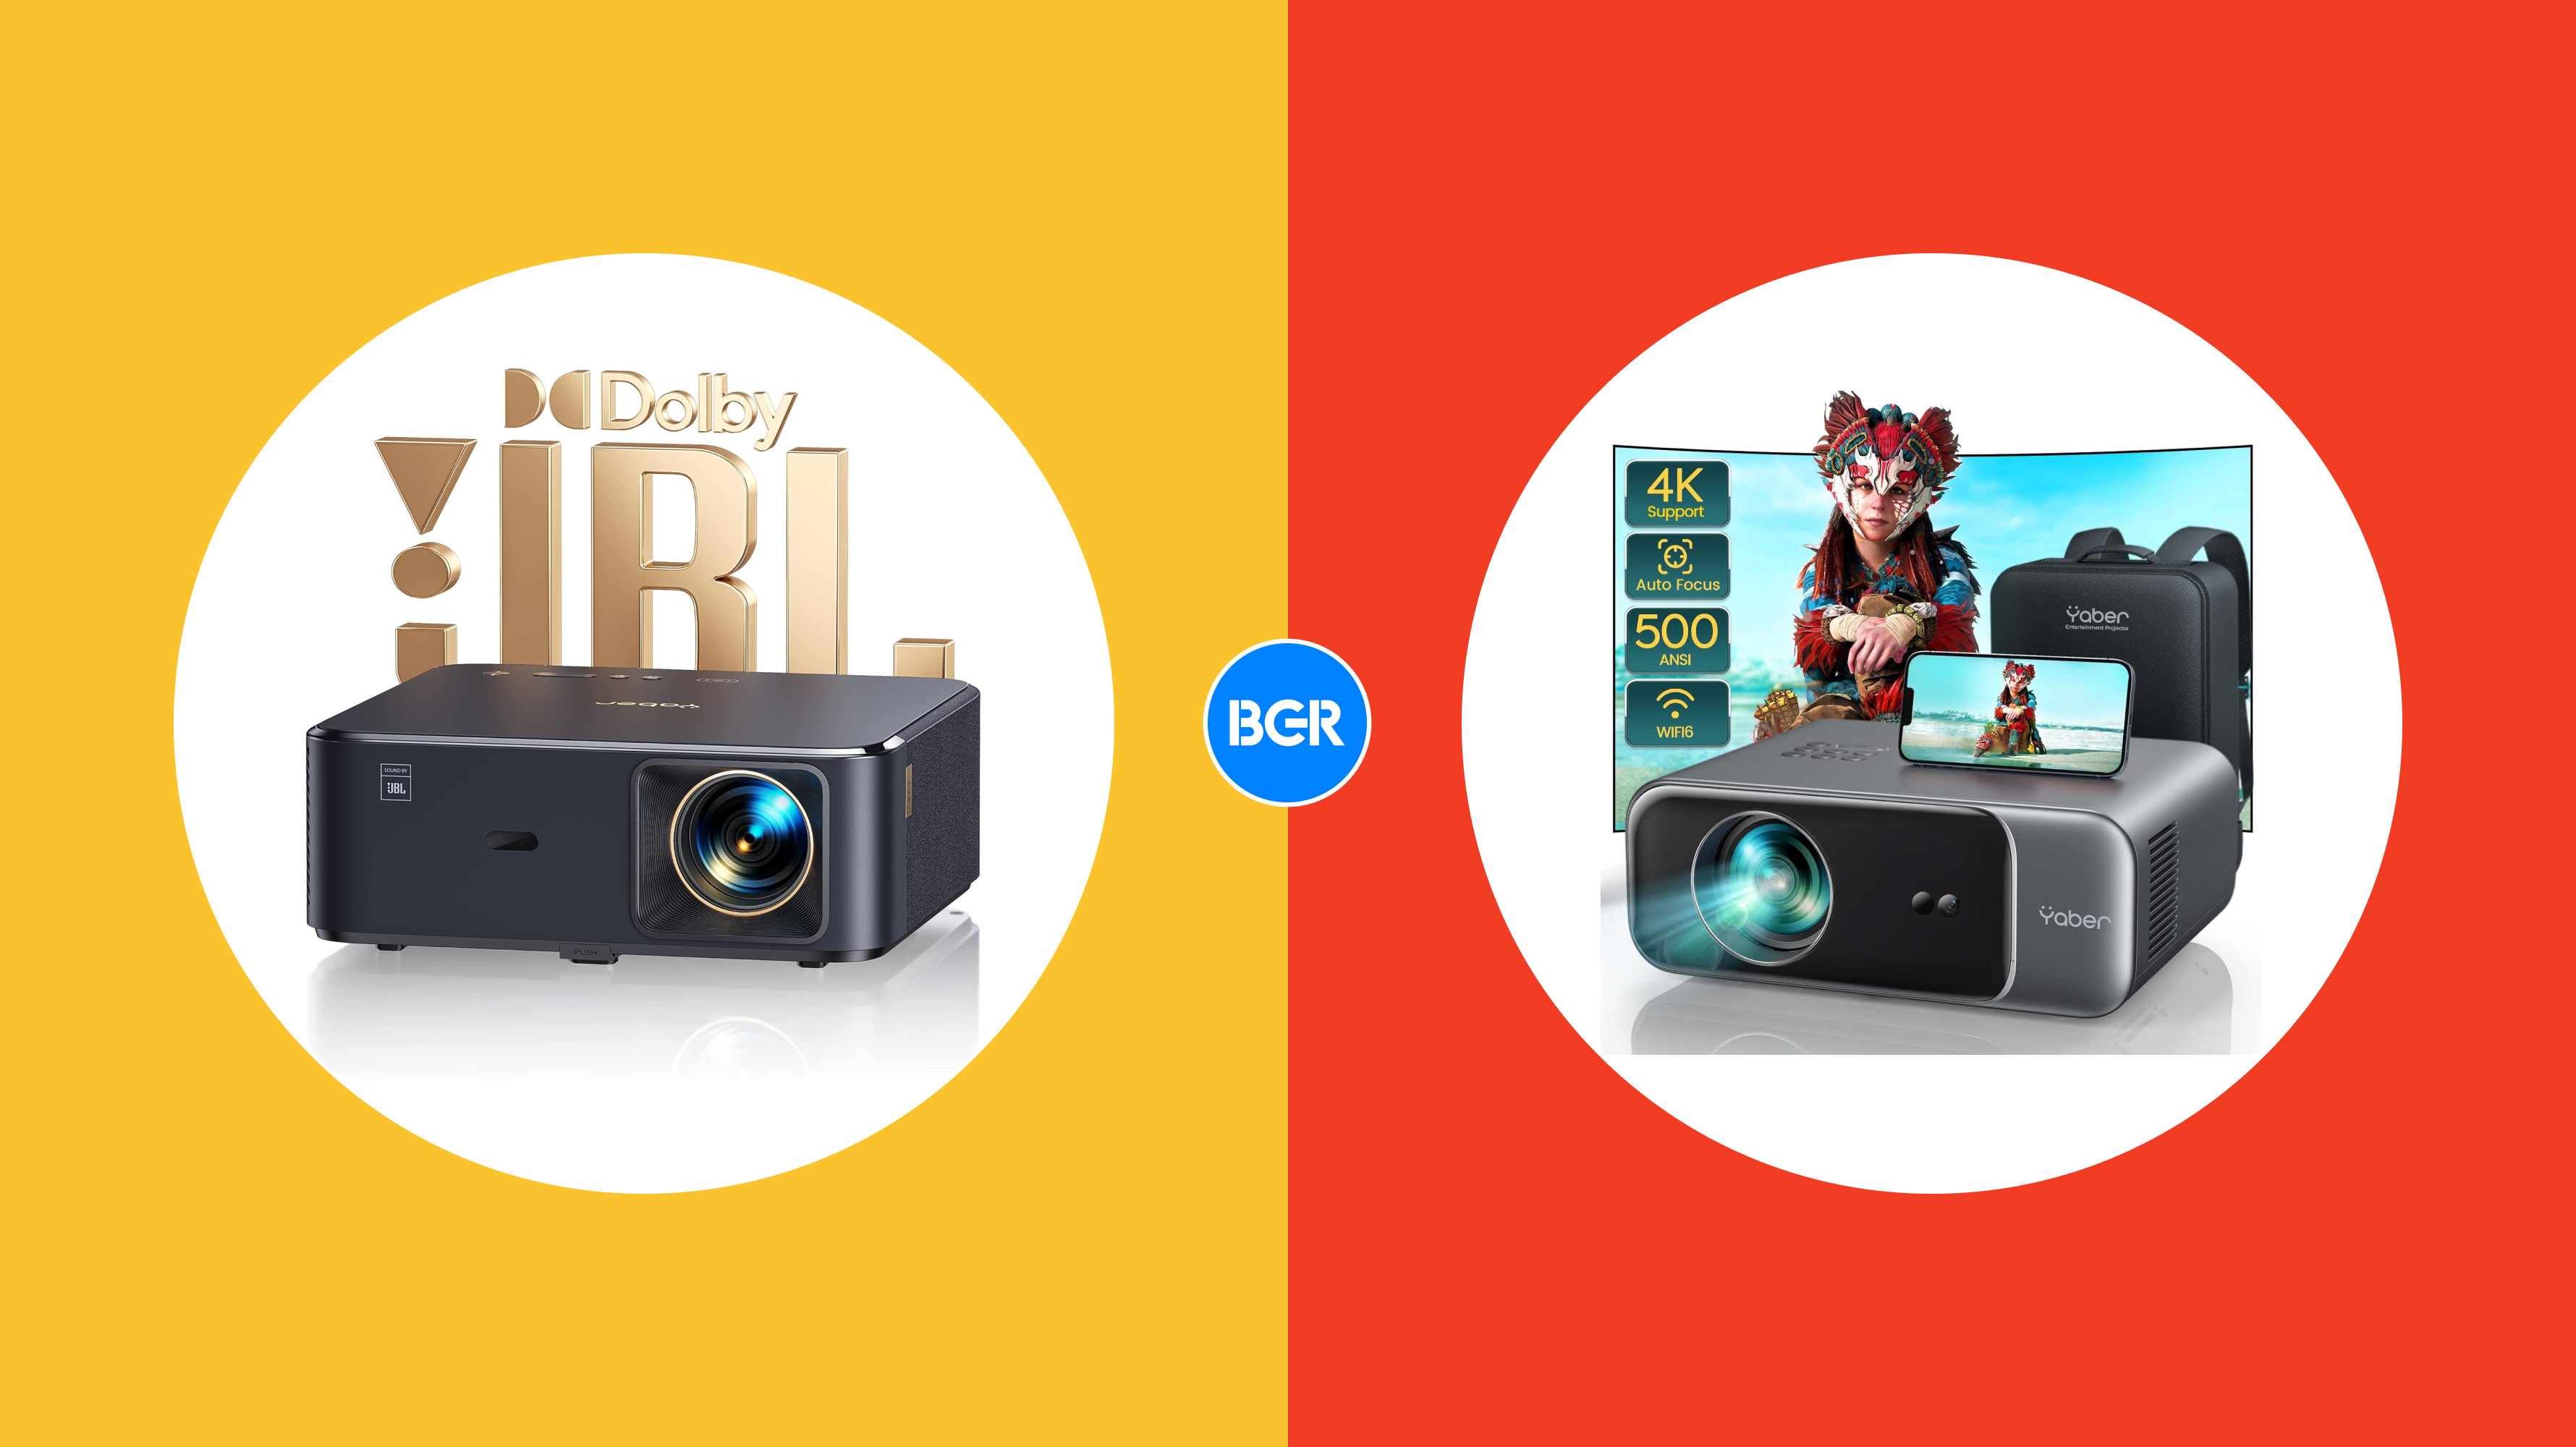 YABER projectors have massive discounts in this last-minute 